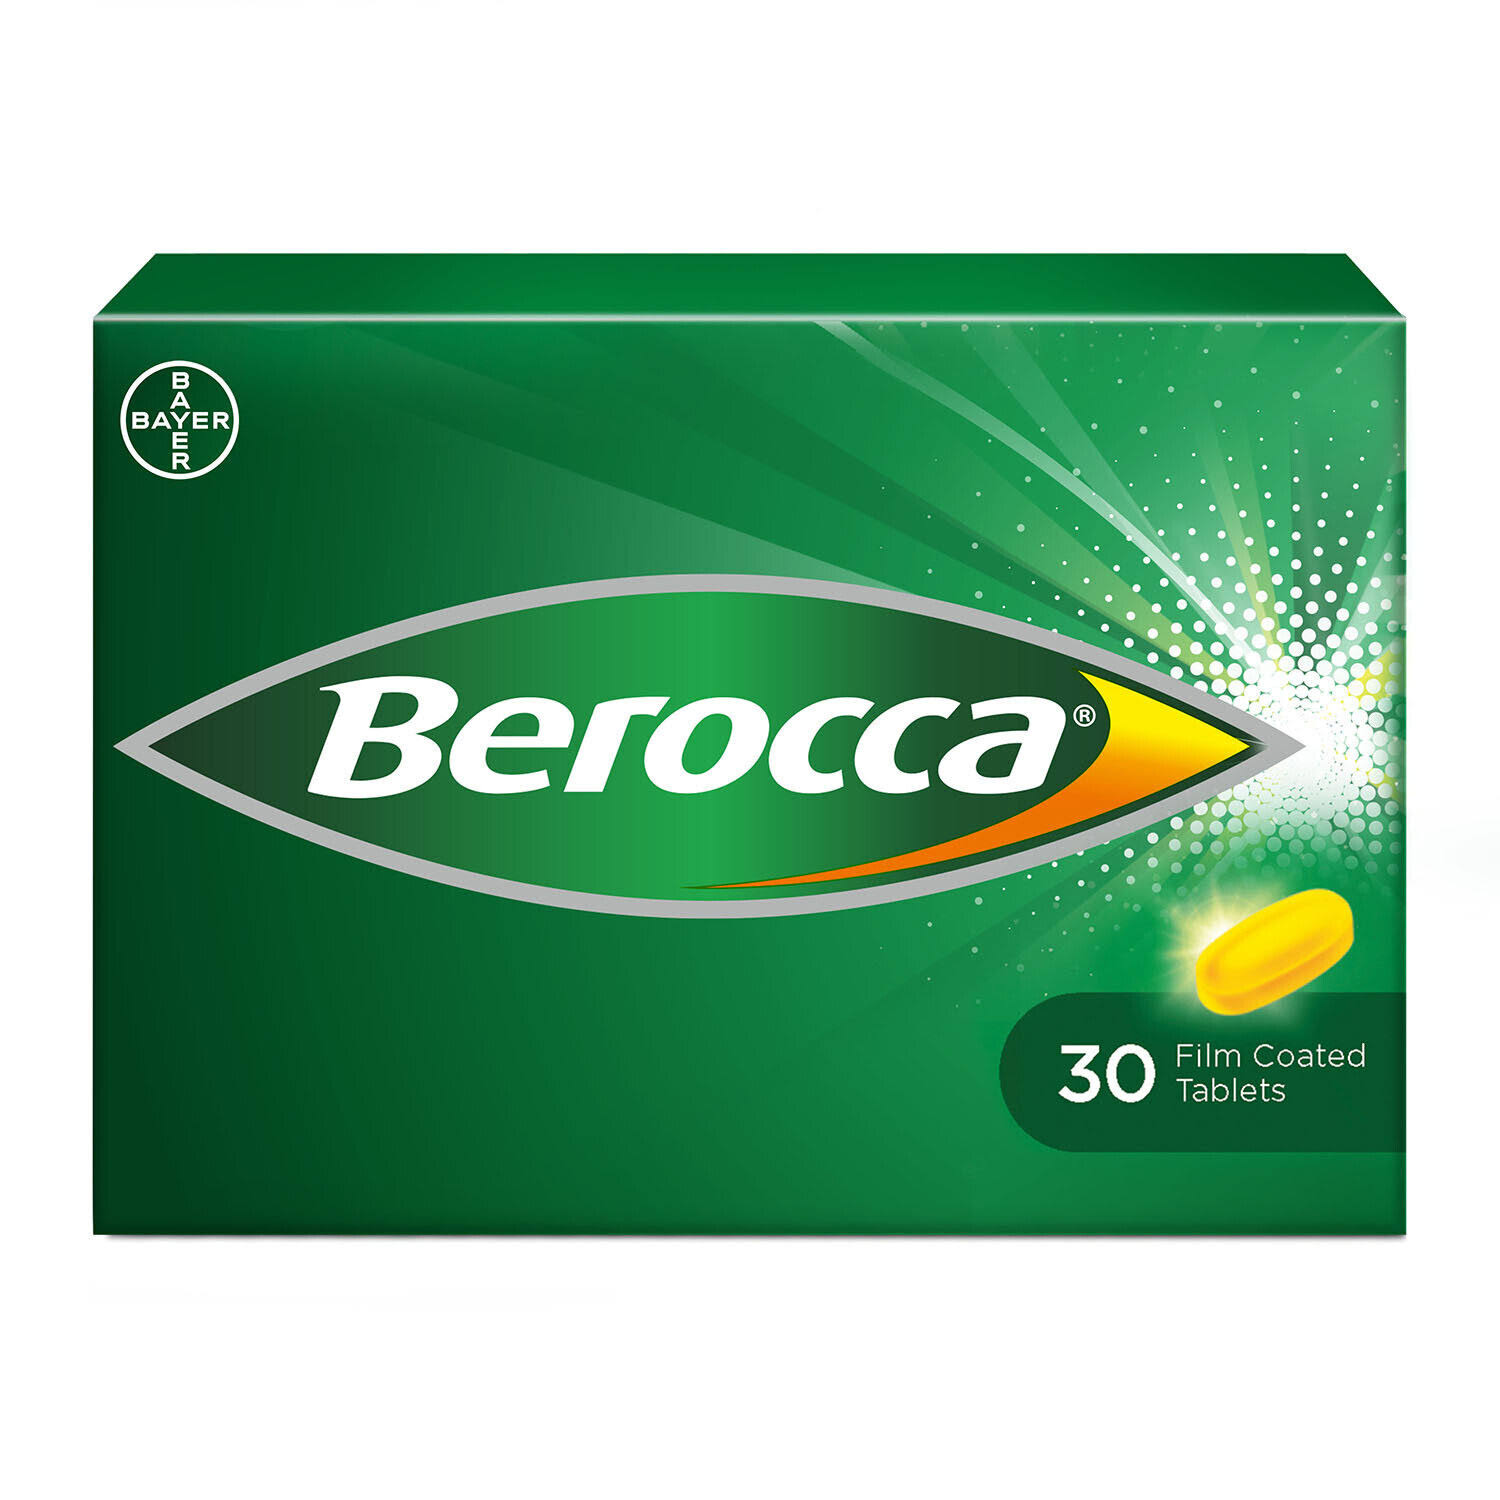 Berocca Film Coated Tabs 30tabs by dpharmacy